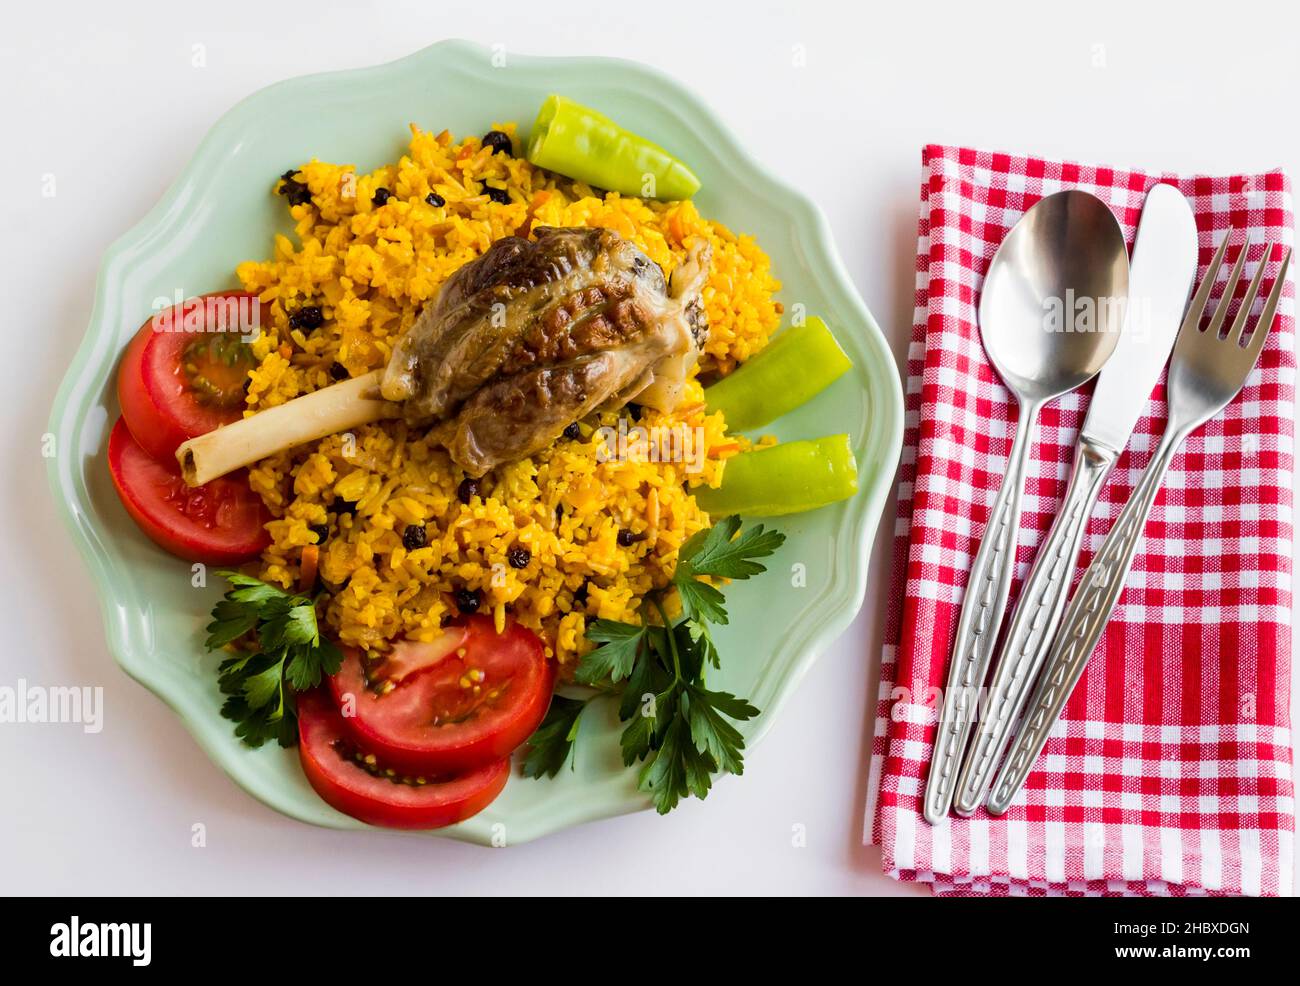 Traditional Arabic rice,pilaff with lamb shank in plate,on white surface with metal cutlery set and red fabric napkin.The Sacrifice Feast Concept Stock Photo